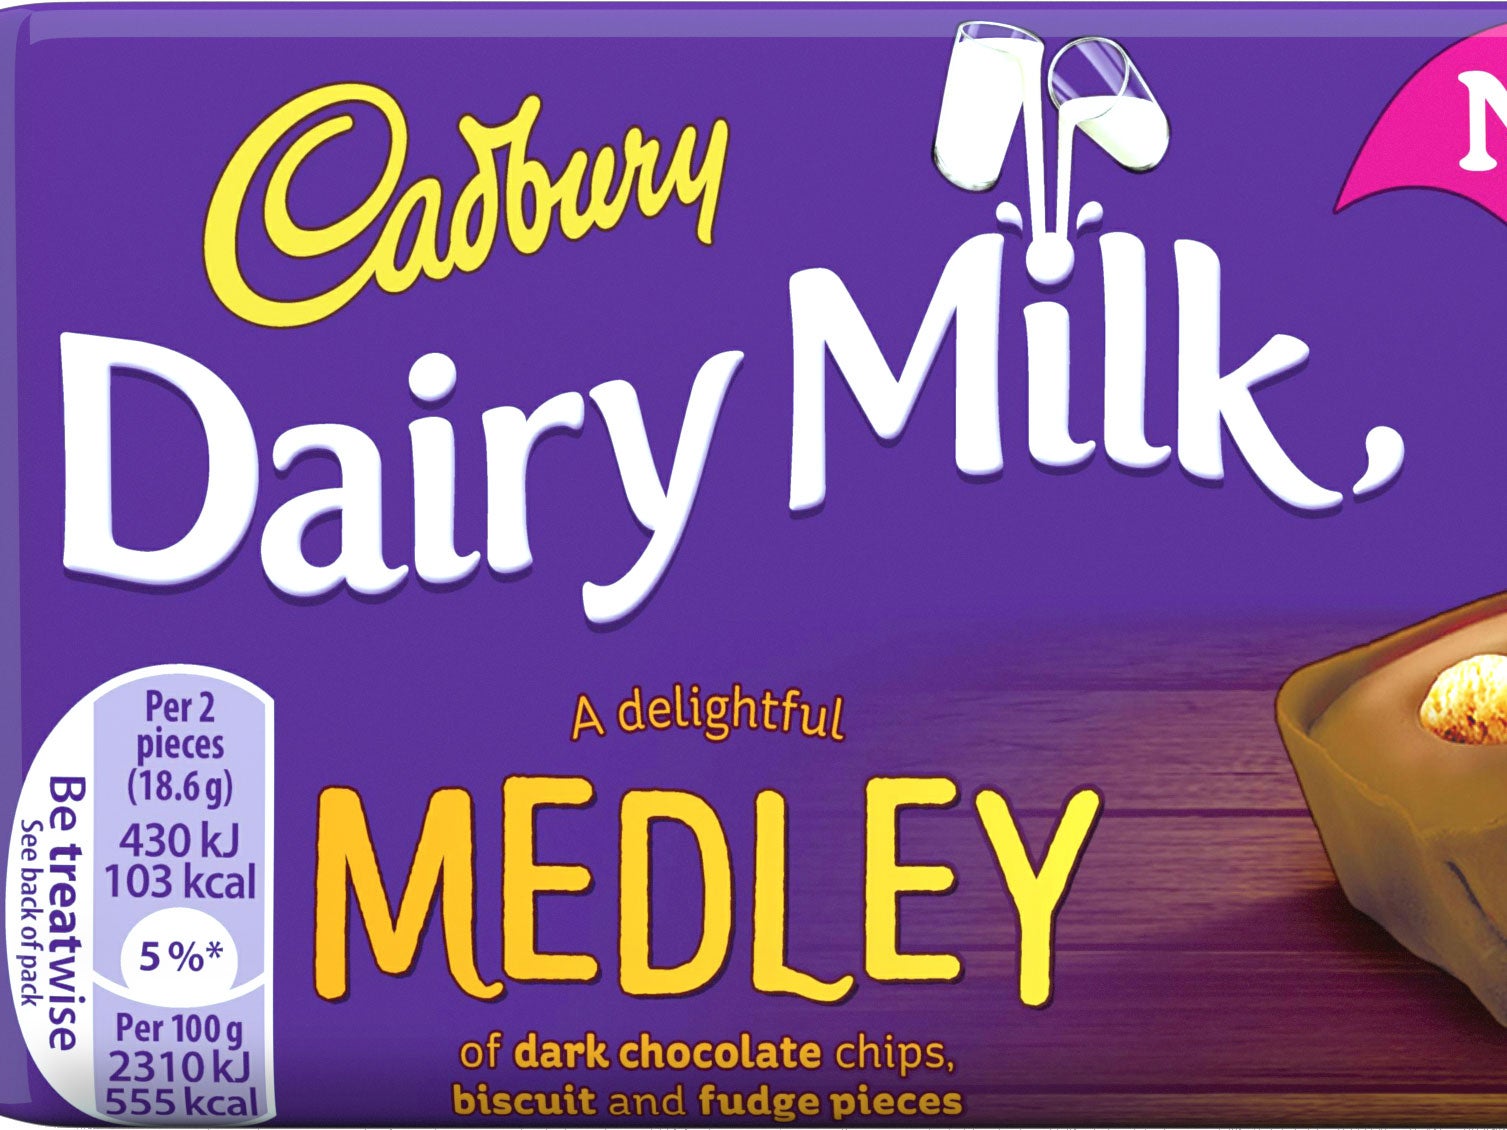 The chocolate-maker has added two new medley bars to its Dairy Milk range